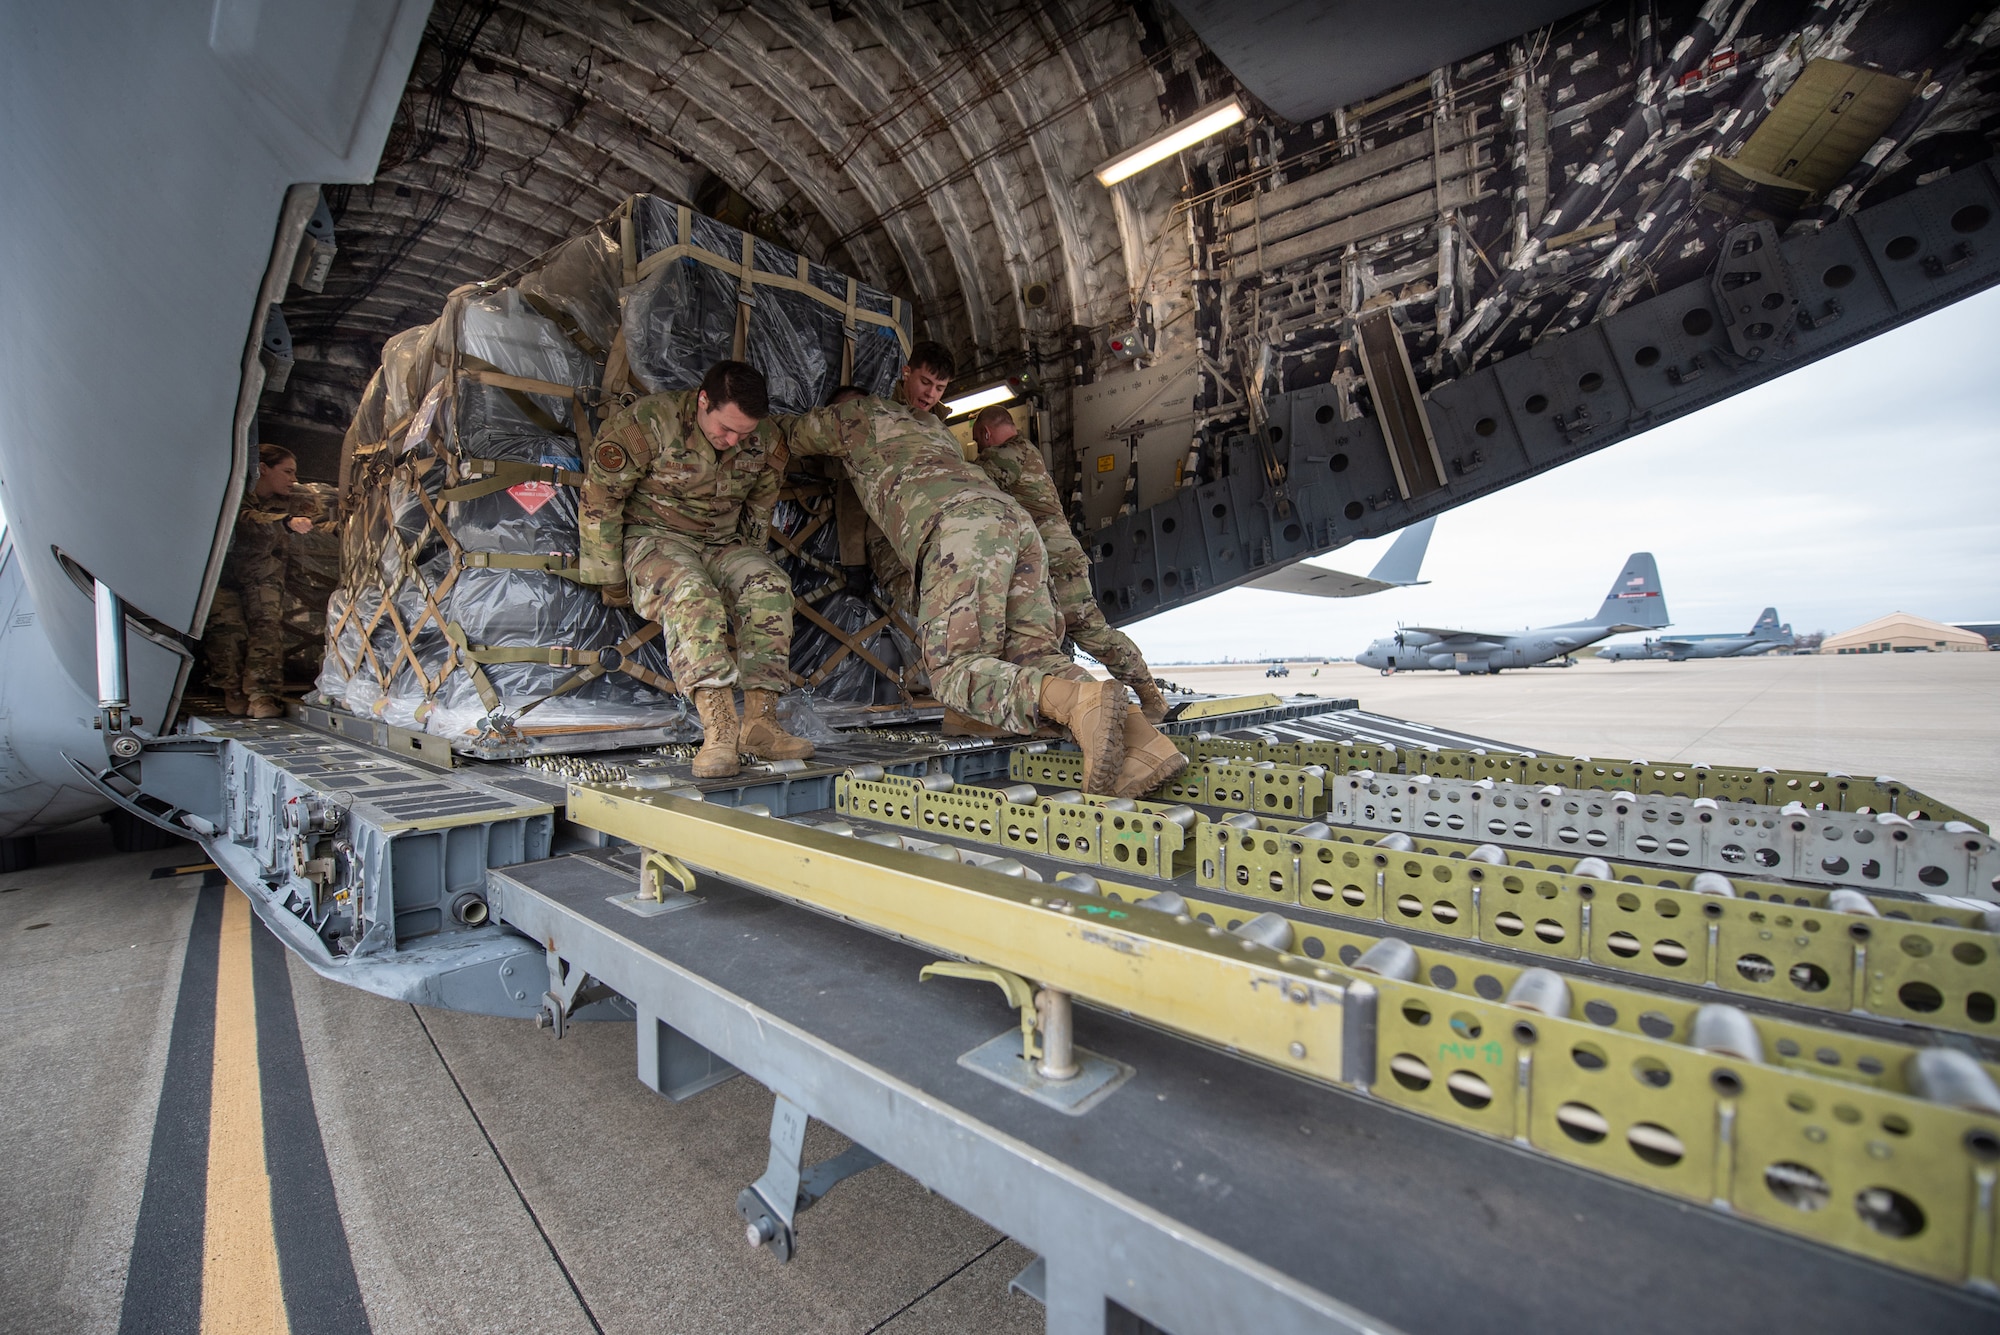 Members of the 123rd Logistics Readiness Squadron load a pallet of cargo onto a North Carolina Air National Guard C-17 Globemaster III at the Kentucky Air National Guard Base in Louisville, Ky., Feb. 10, 2023. The gear was transported to the Northern Mariana Islands for Cope North, a multinational exercise designed to enhance combat readiness in the South Pacific.